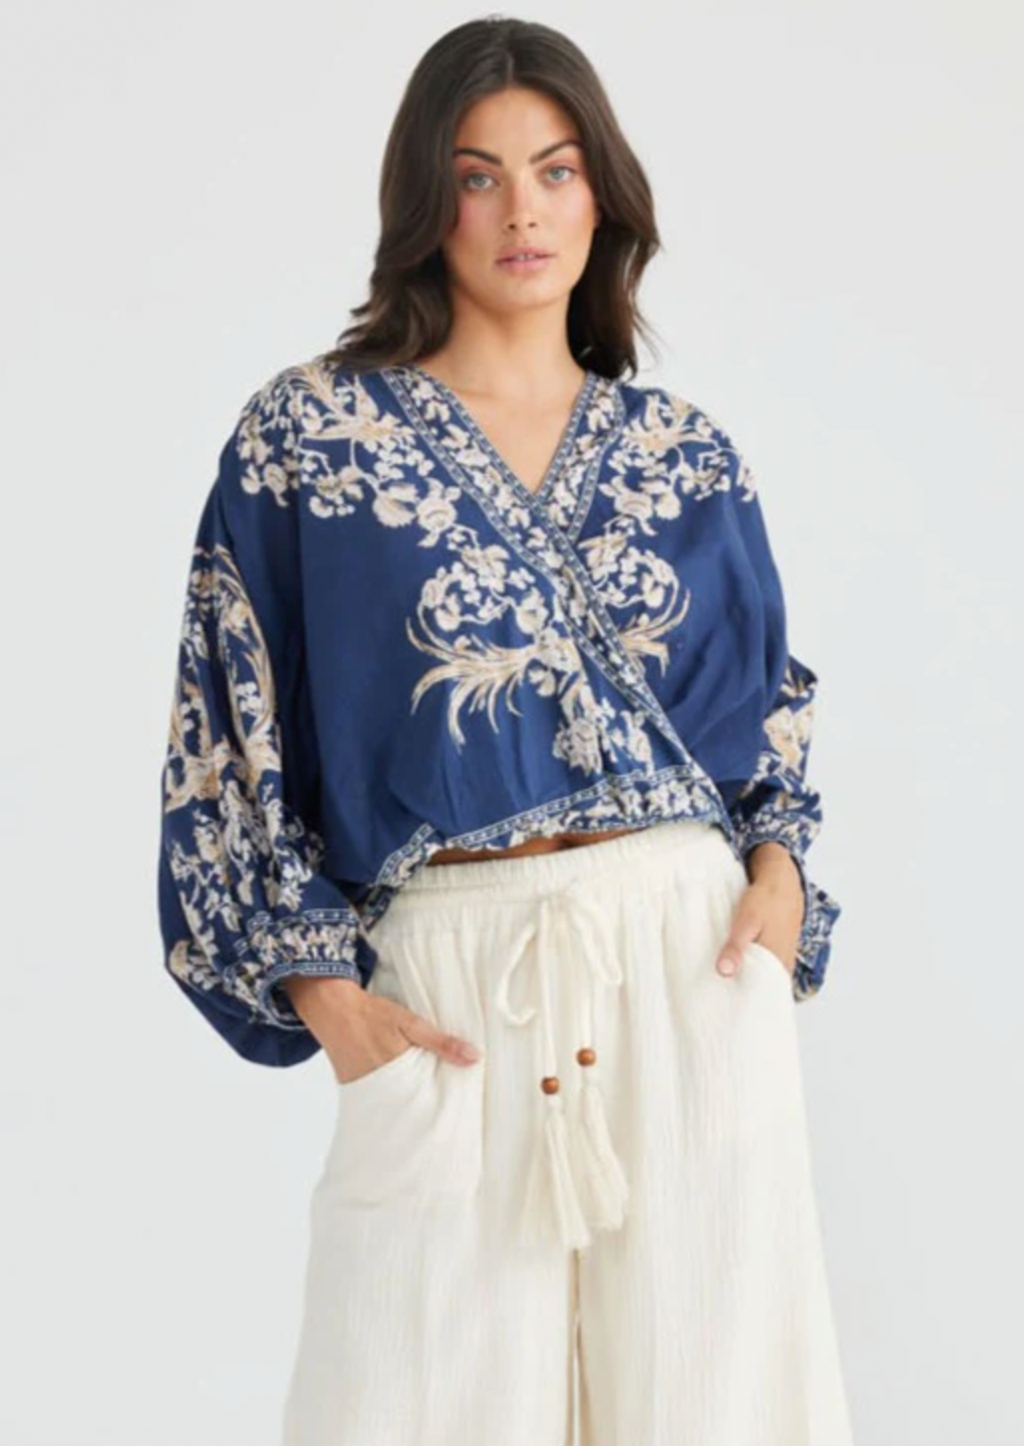 Kandy Top - Empress Indigo, by Talisman • CROSS OVER FRONT • OVERSIZED FIT • EXAGGERATED BATWING SLEEVE WITH ELASTIC CUFF •GATHERED BACK YOKE FEATURE • ELASTIC FRONT WAIST